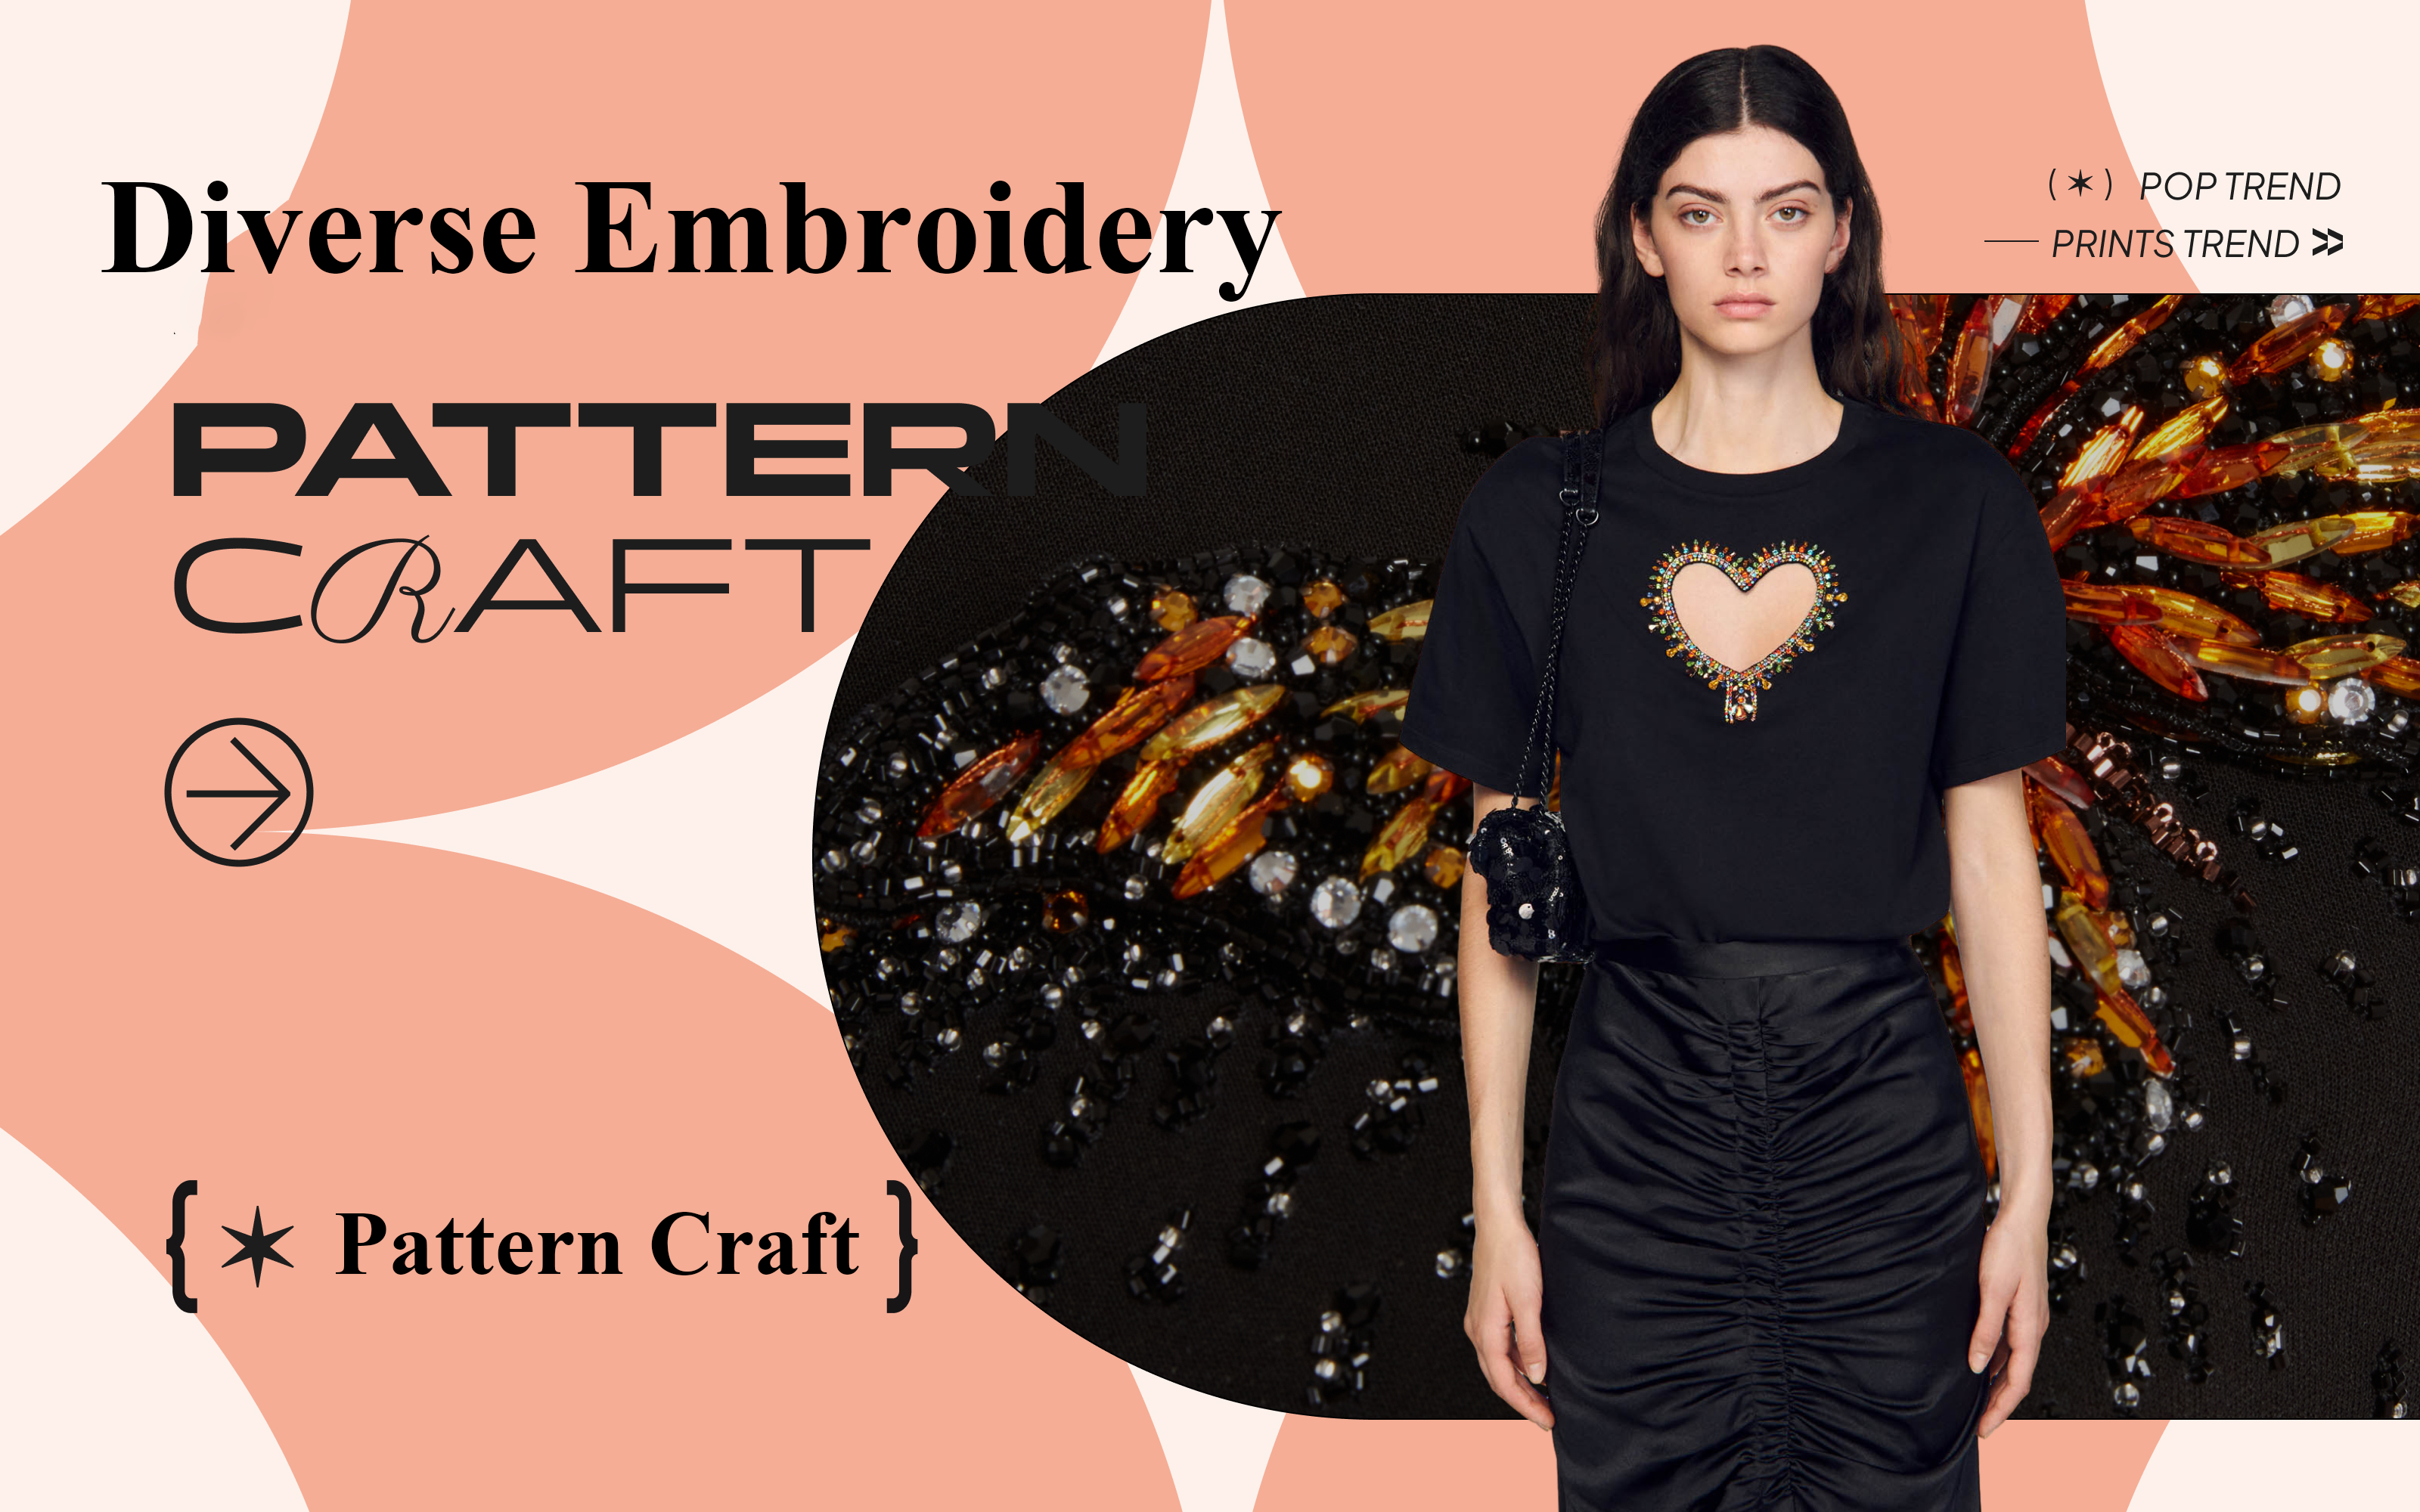 Diverse Embroidery -- The Pattern Craft Trend for Women's T-shirt & Sweatshirt